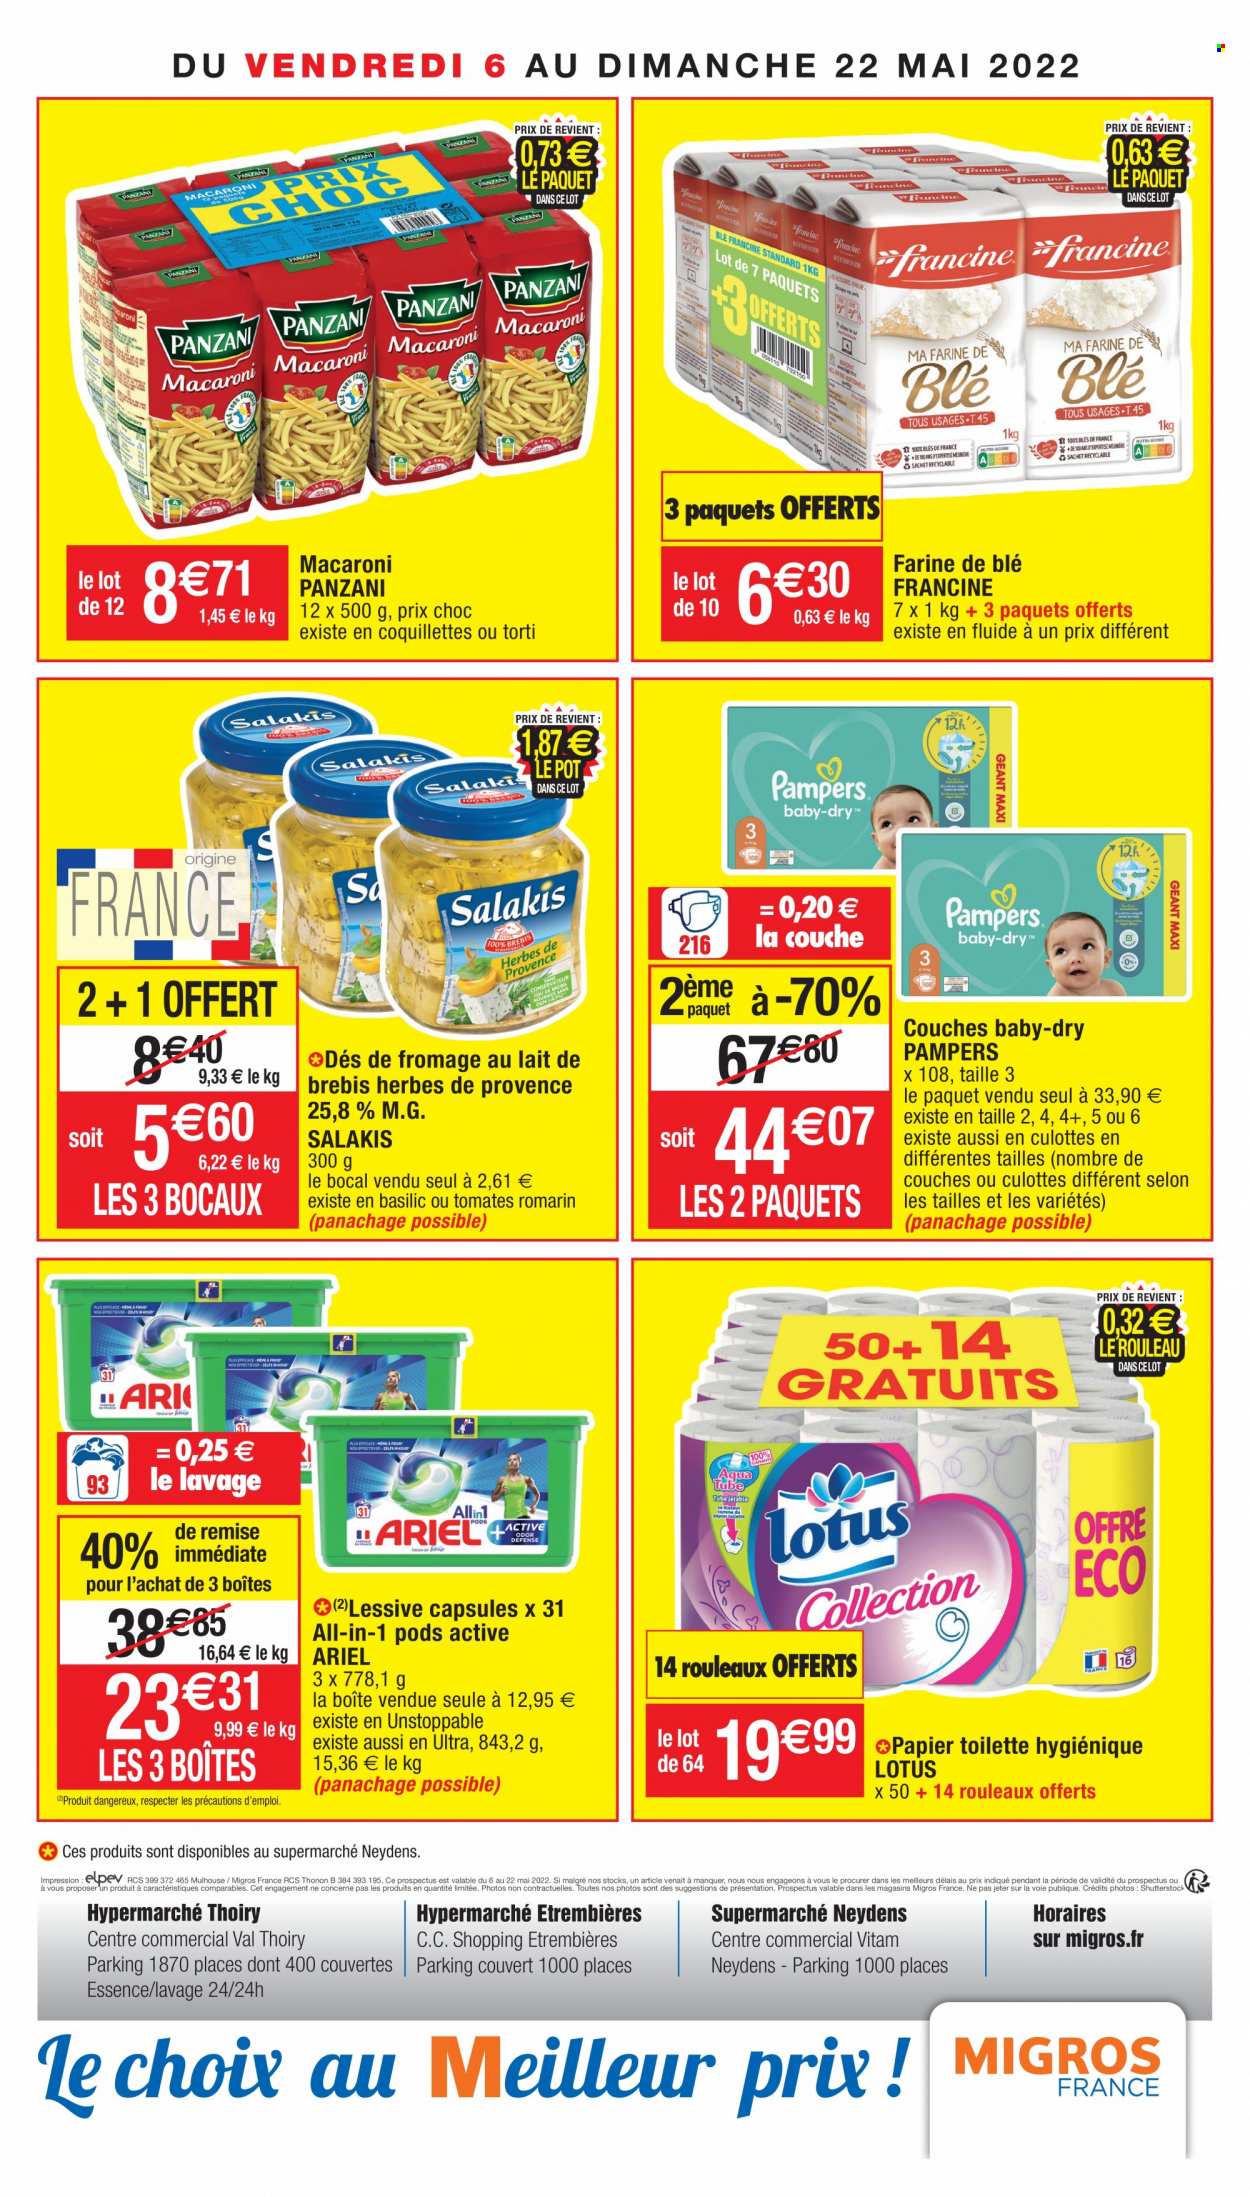 Catalogue Migros France - 06.05.2022 - 22.05.2022. Page 24.